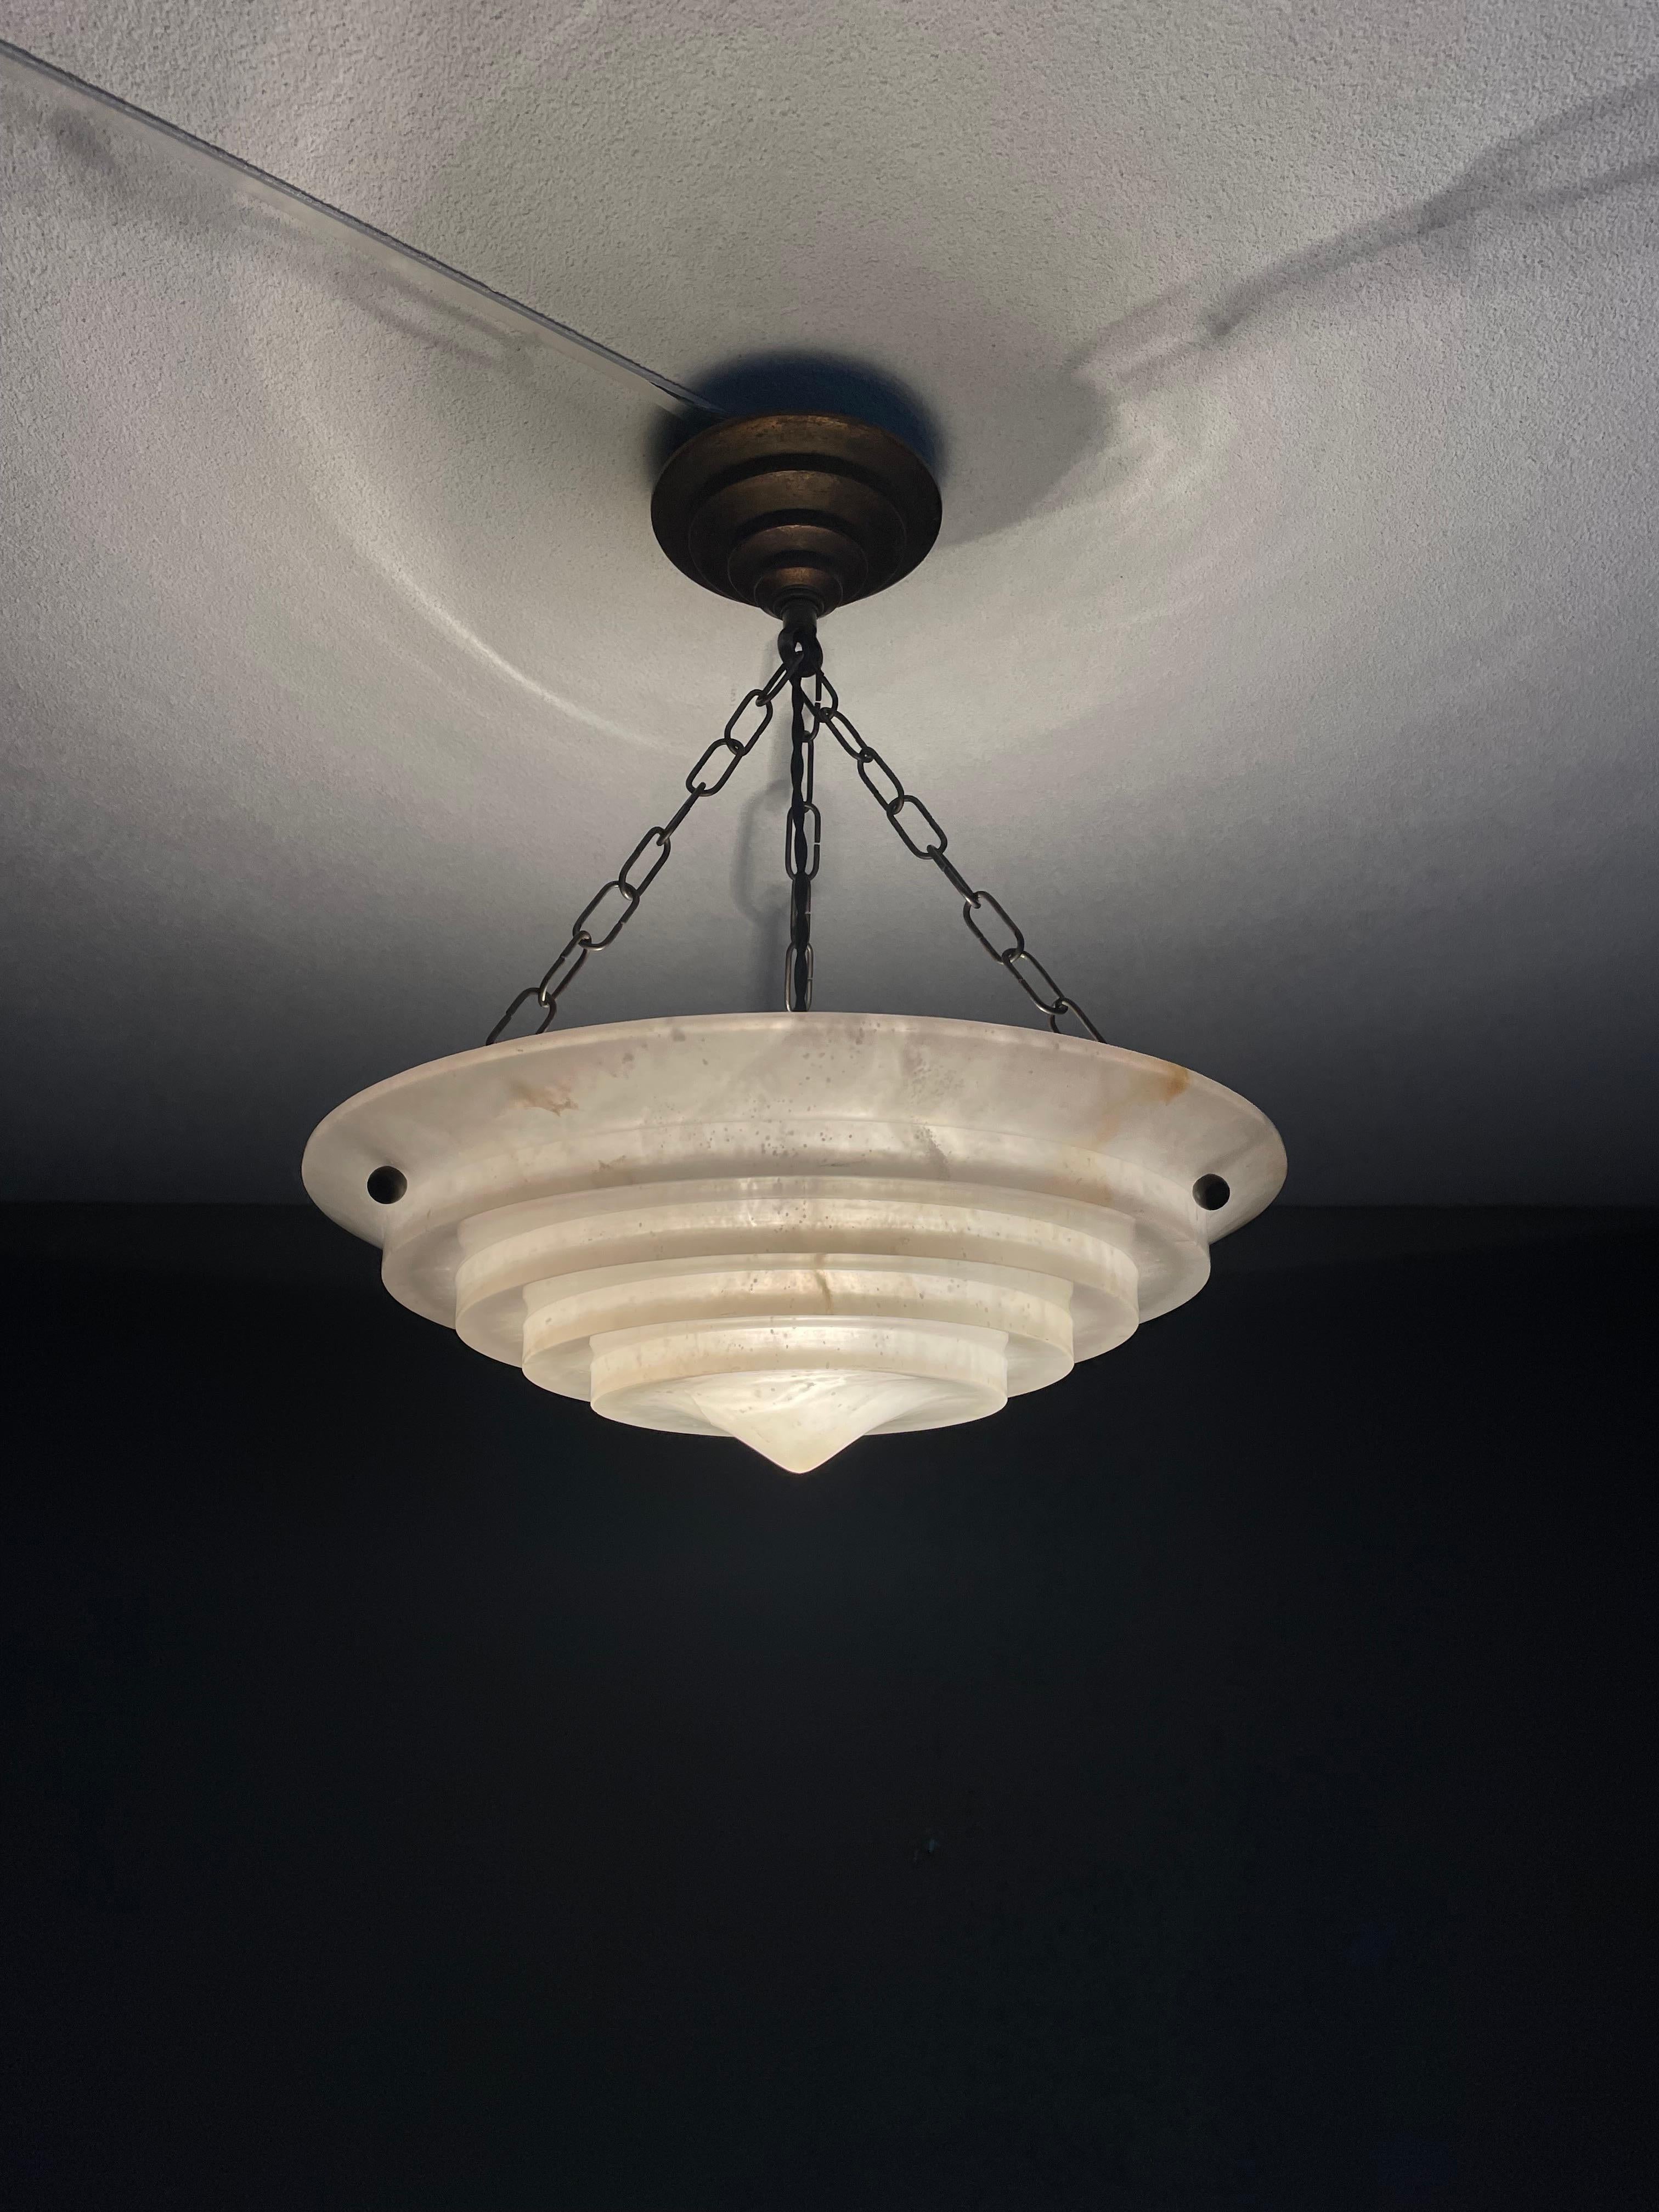 Stunning and good size, alabaster pendant of great quality and good condition.

This rare fixture from the heydays of the European Art Deco era could soon be lighting up your days and evenings. Its remarkable, circular and layered shade is all